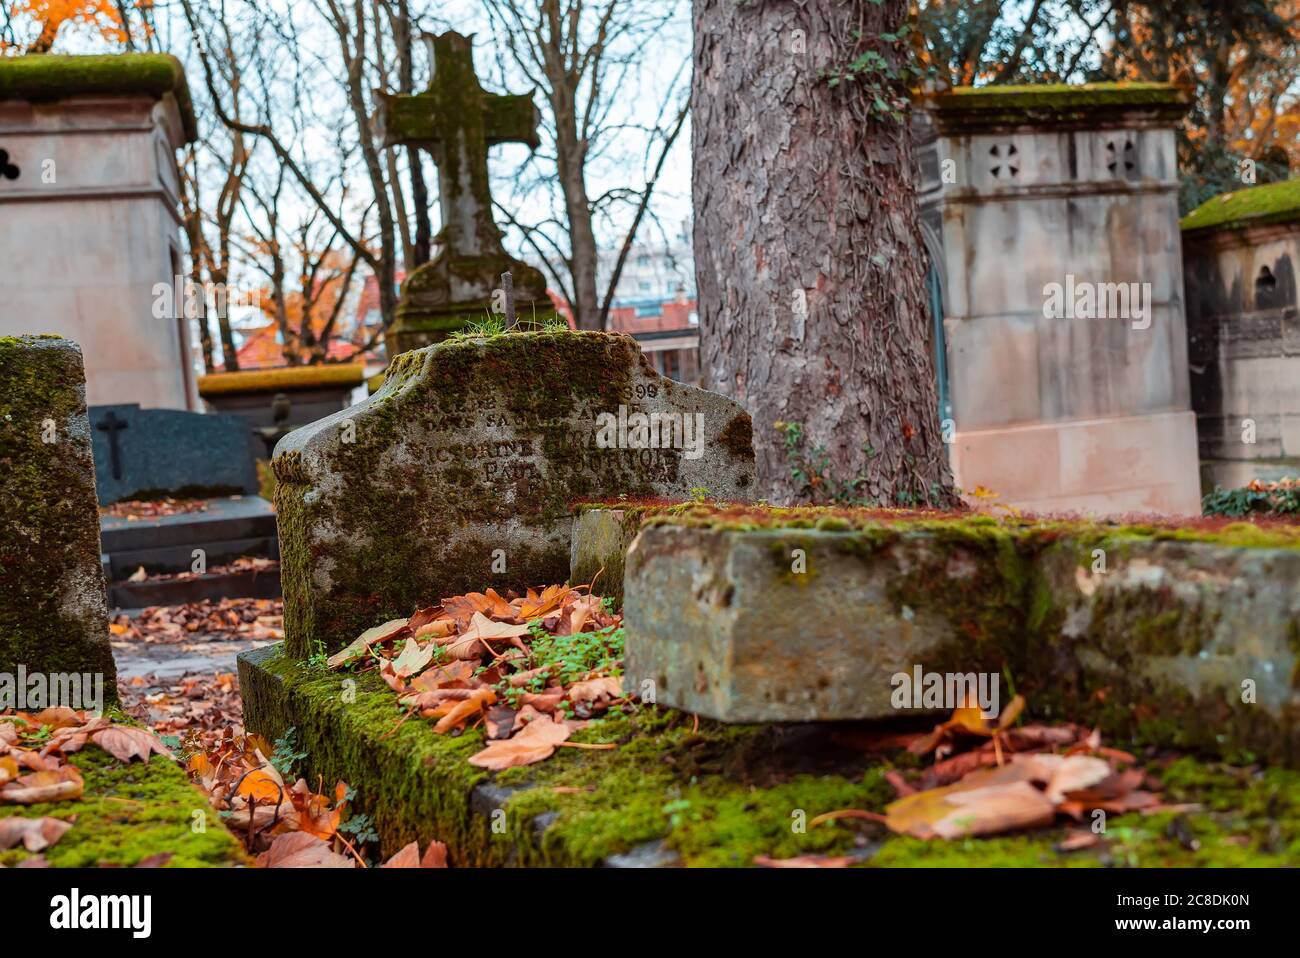 Paris, France - November 14, 2019: Stone cross in the most famous cemetery of Paris Pere Lachaise, France. Tombs of various famous people. Golden autu Stock Photo